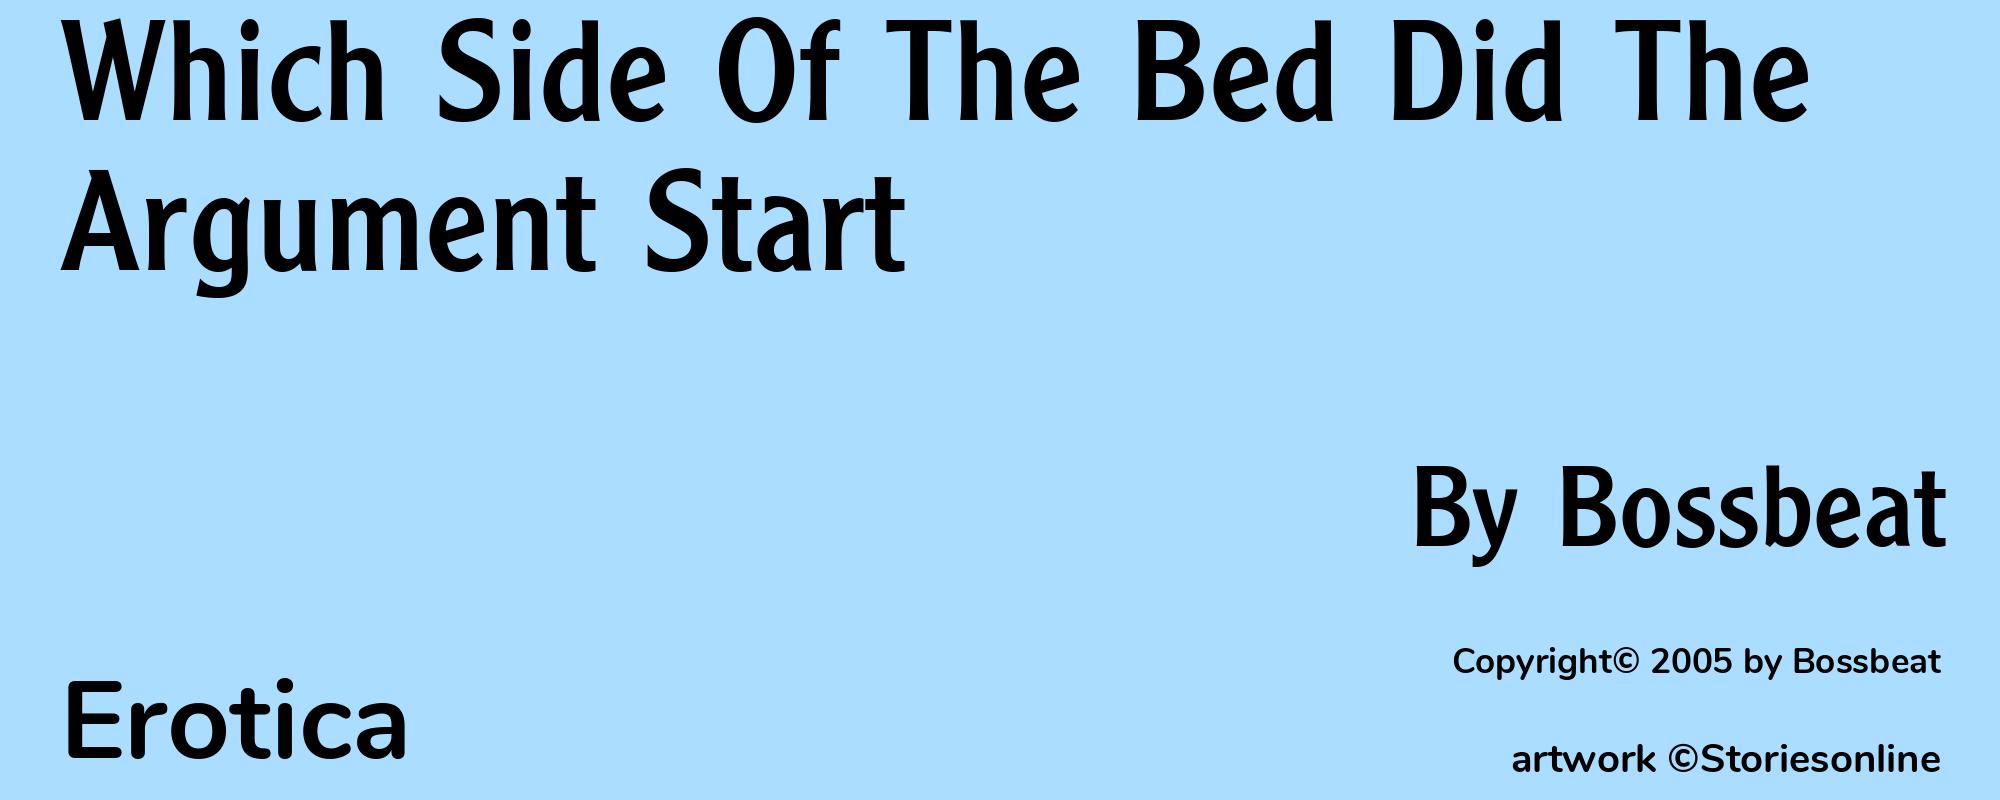 Which Side Of The Bed Did The Argument Start - Cover